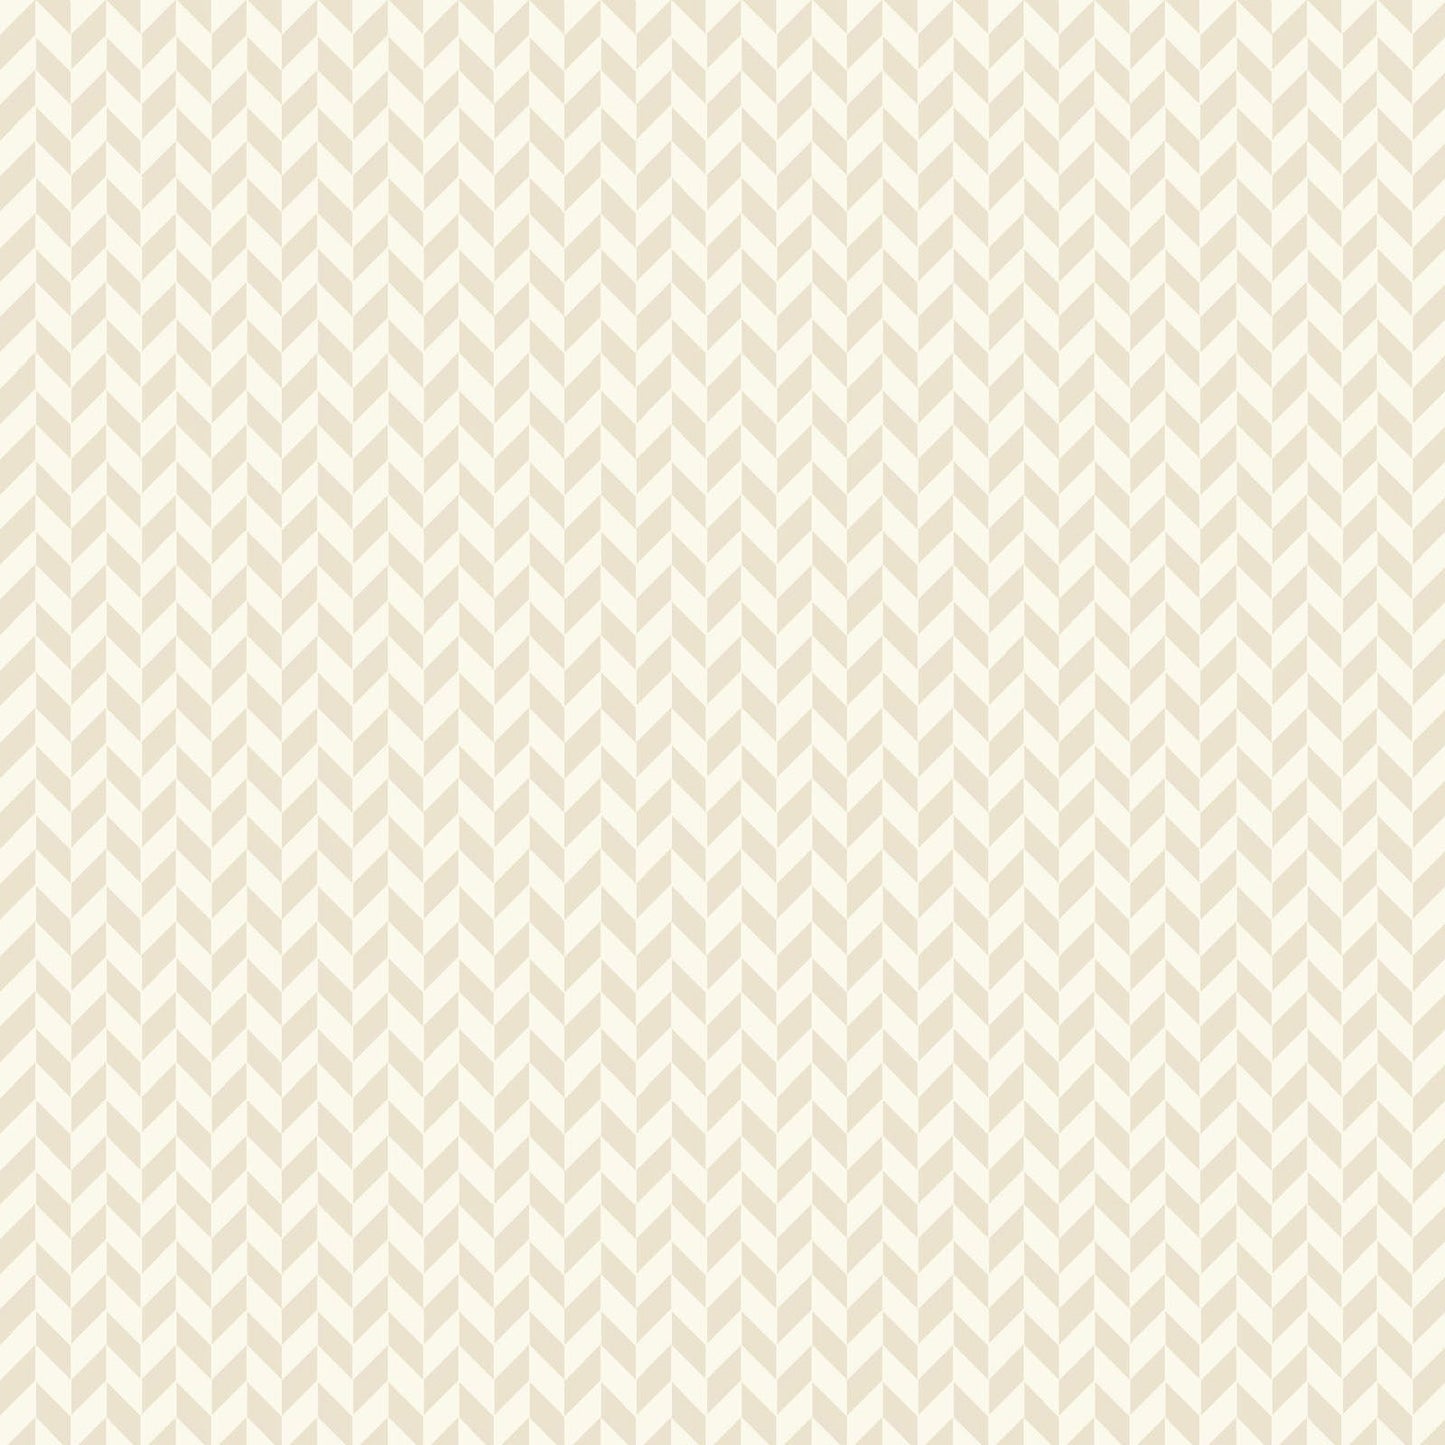 Herringbone in cream (MAS9397-E) is part of the Kimberbell Basics line designed by Kim Christopherson for Maywood Studio. This fabric features a two-tone cream herringbone and adds a sophisticated texture to projects.